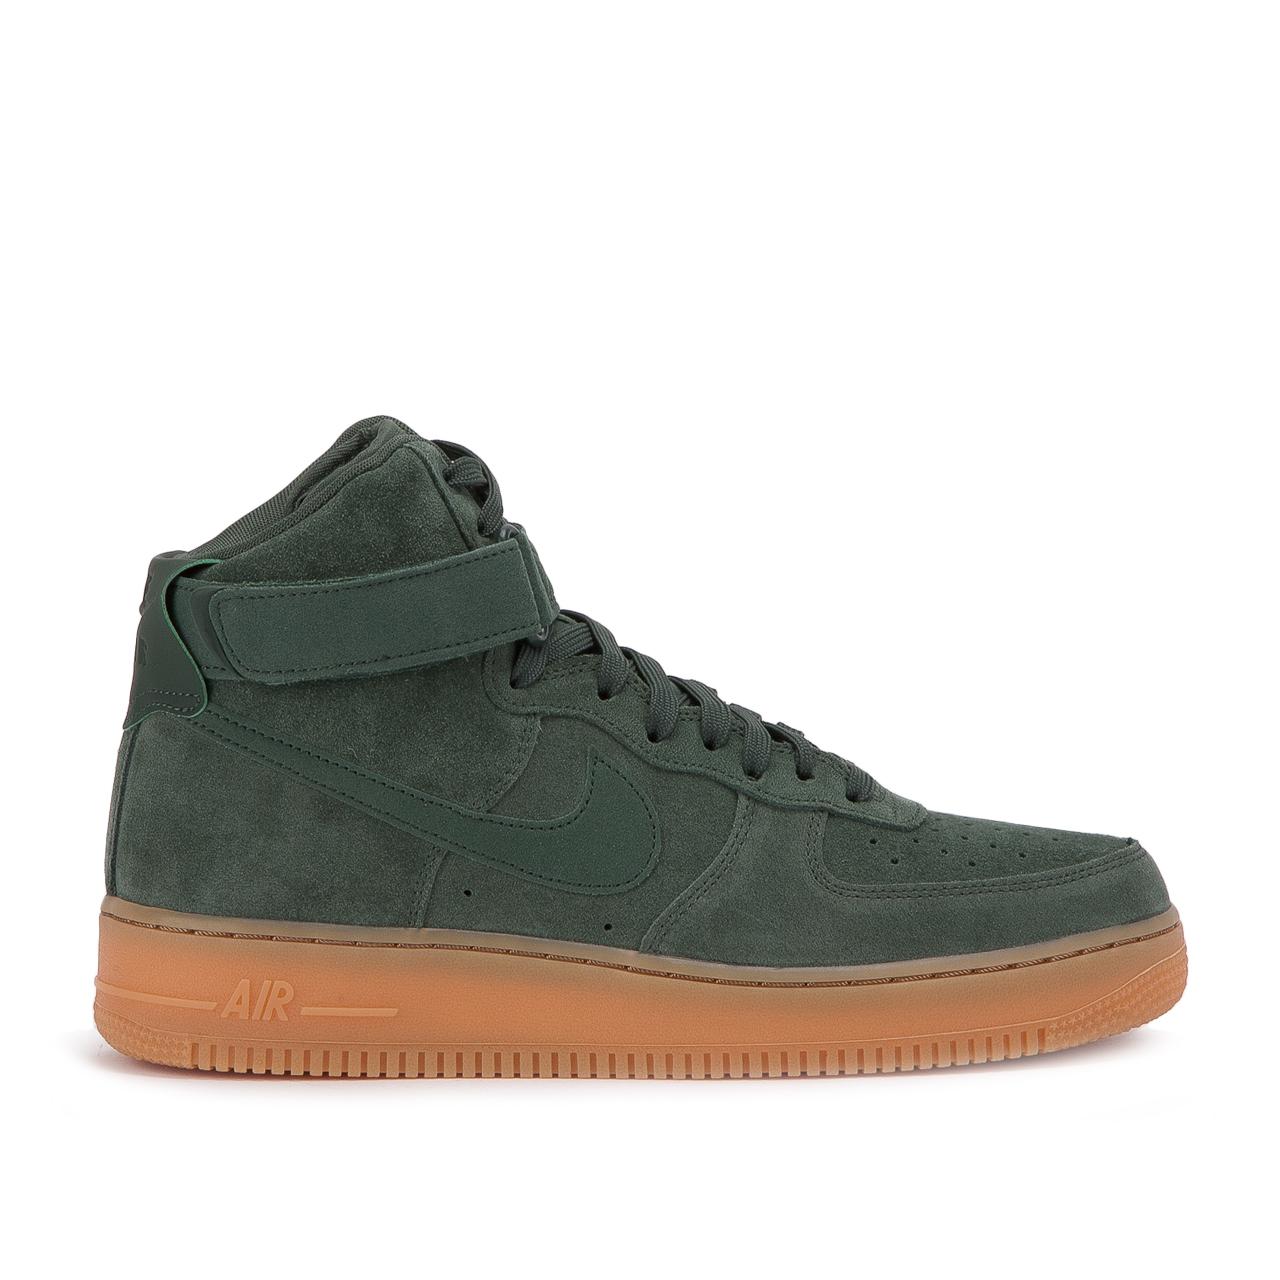 Nike Air Force 1 High 07 Lv8 Suede 